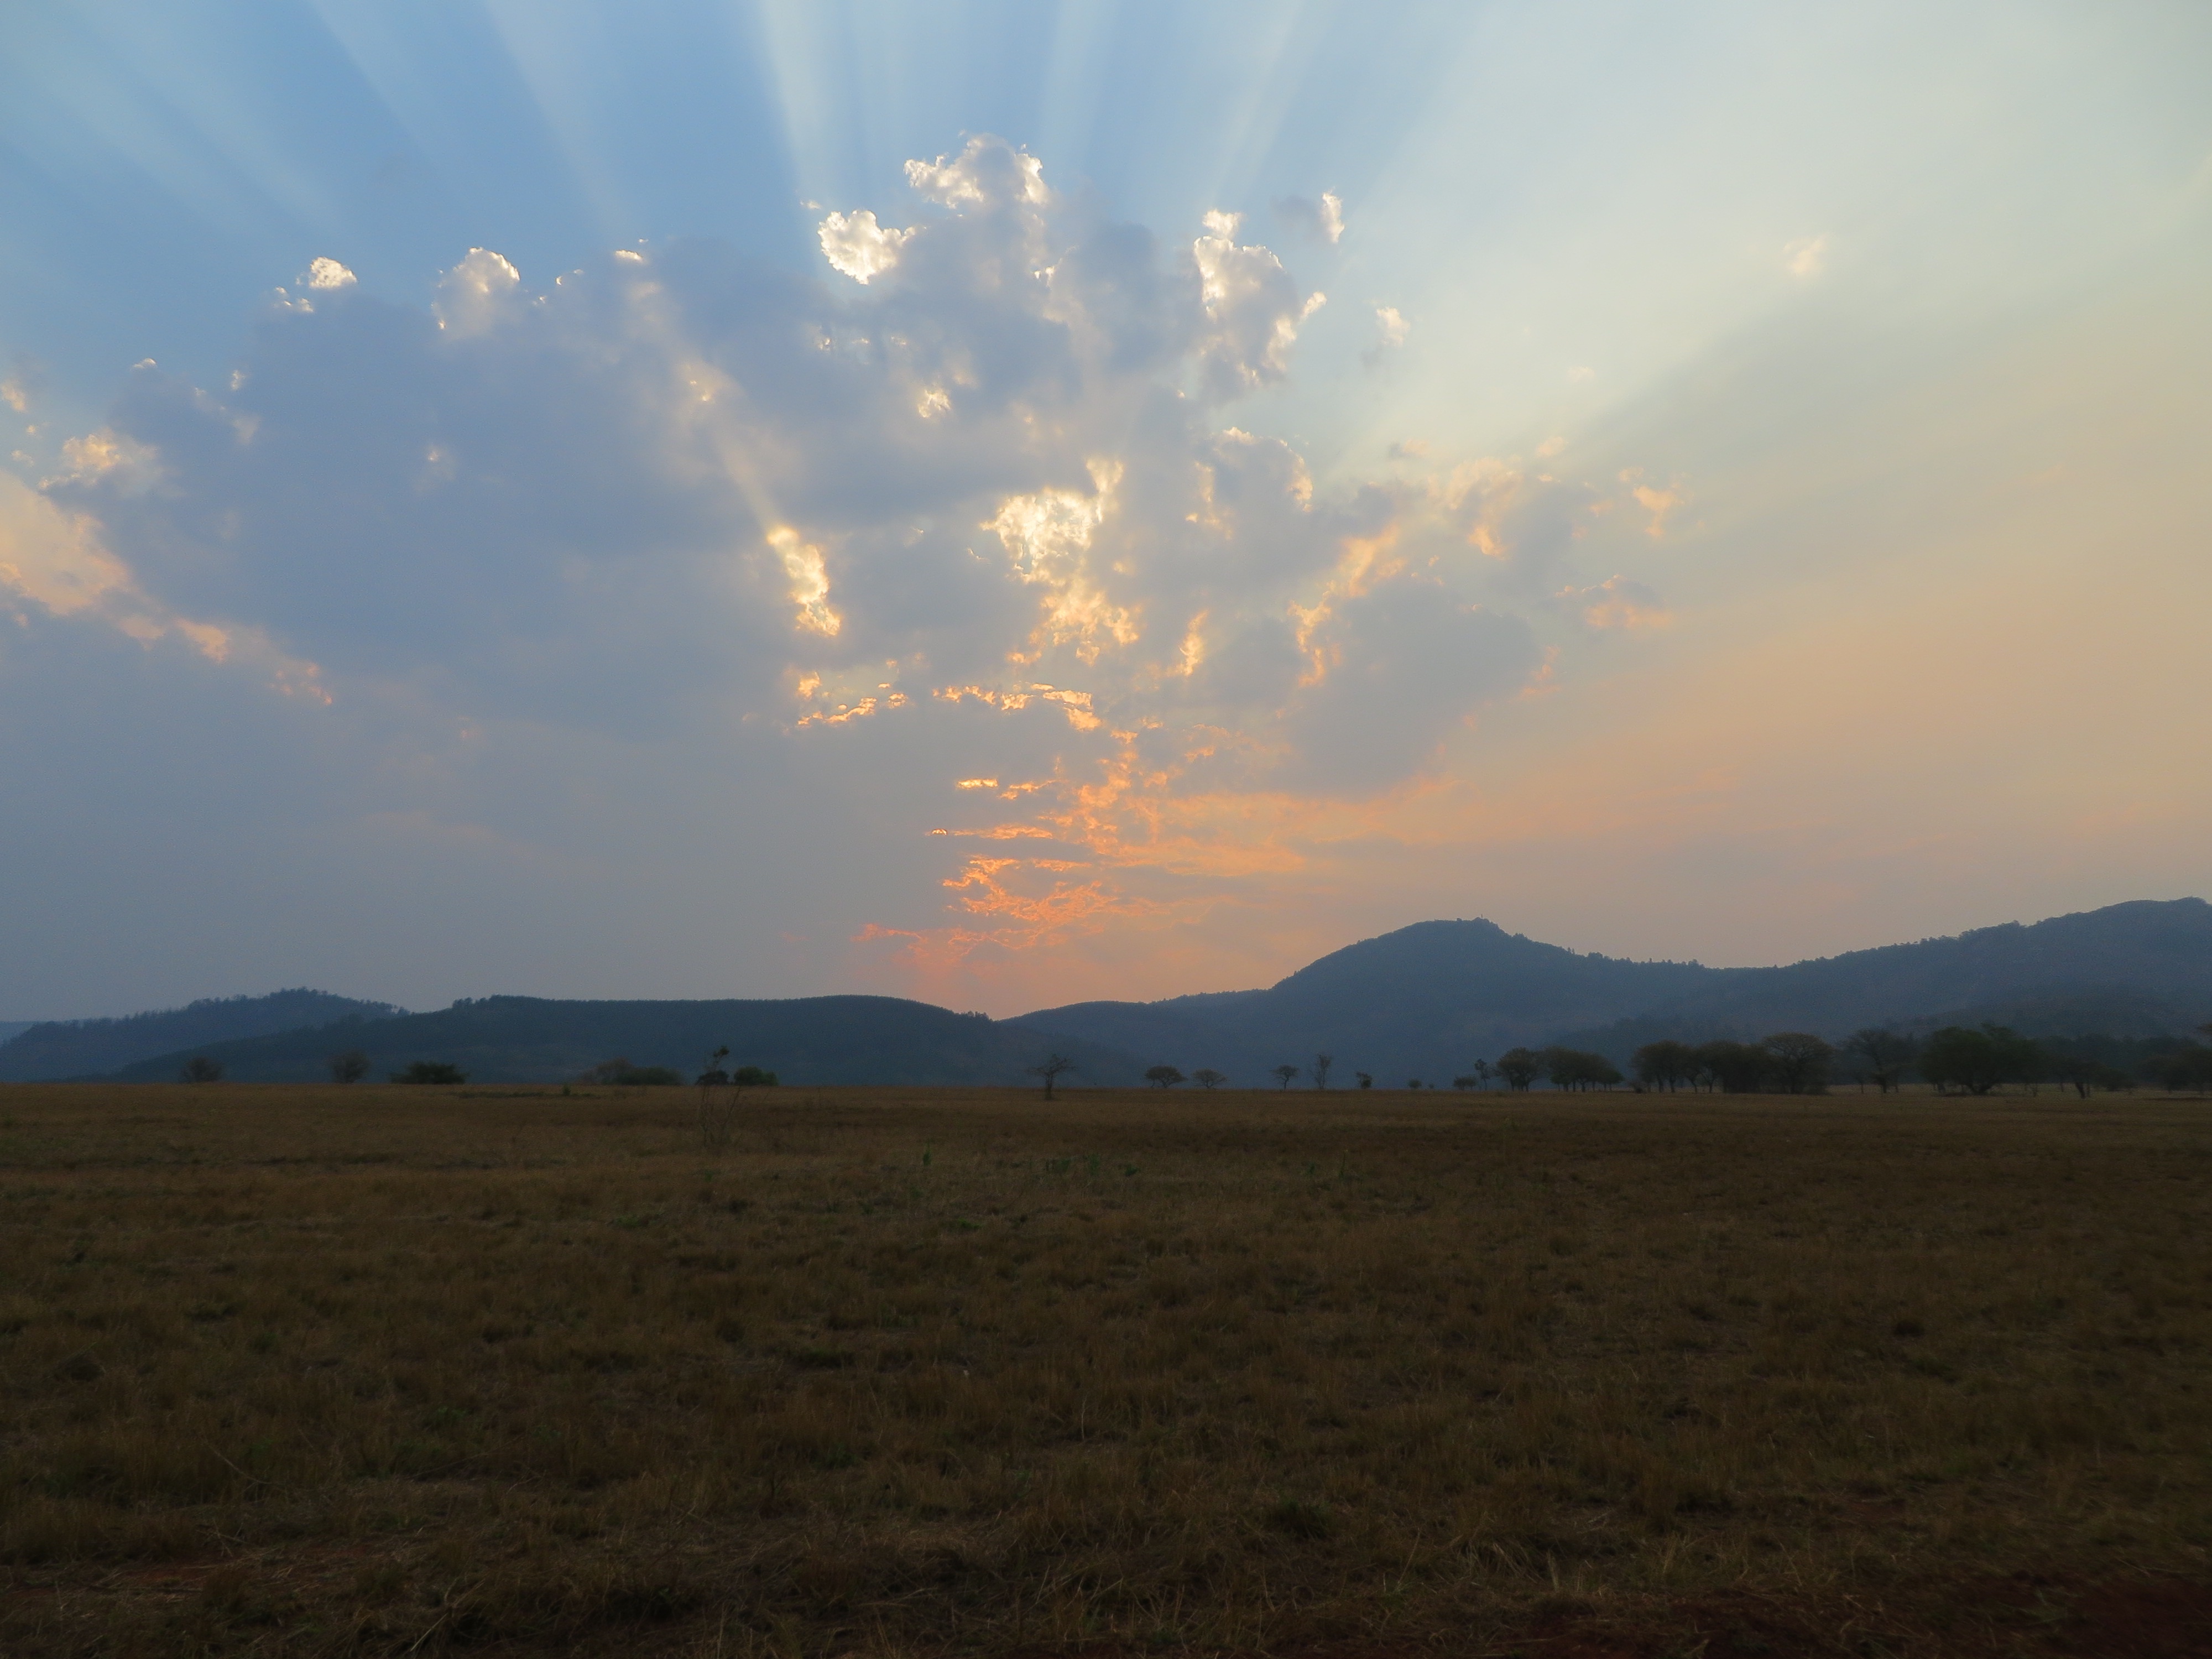 Sunrise over the mountains of The Kingdom of Swaziland.